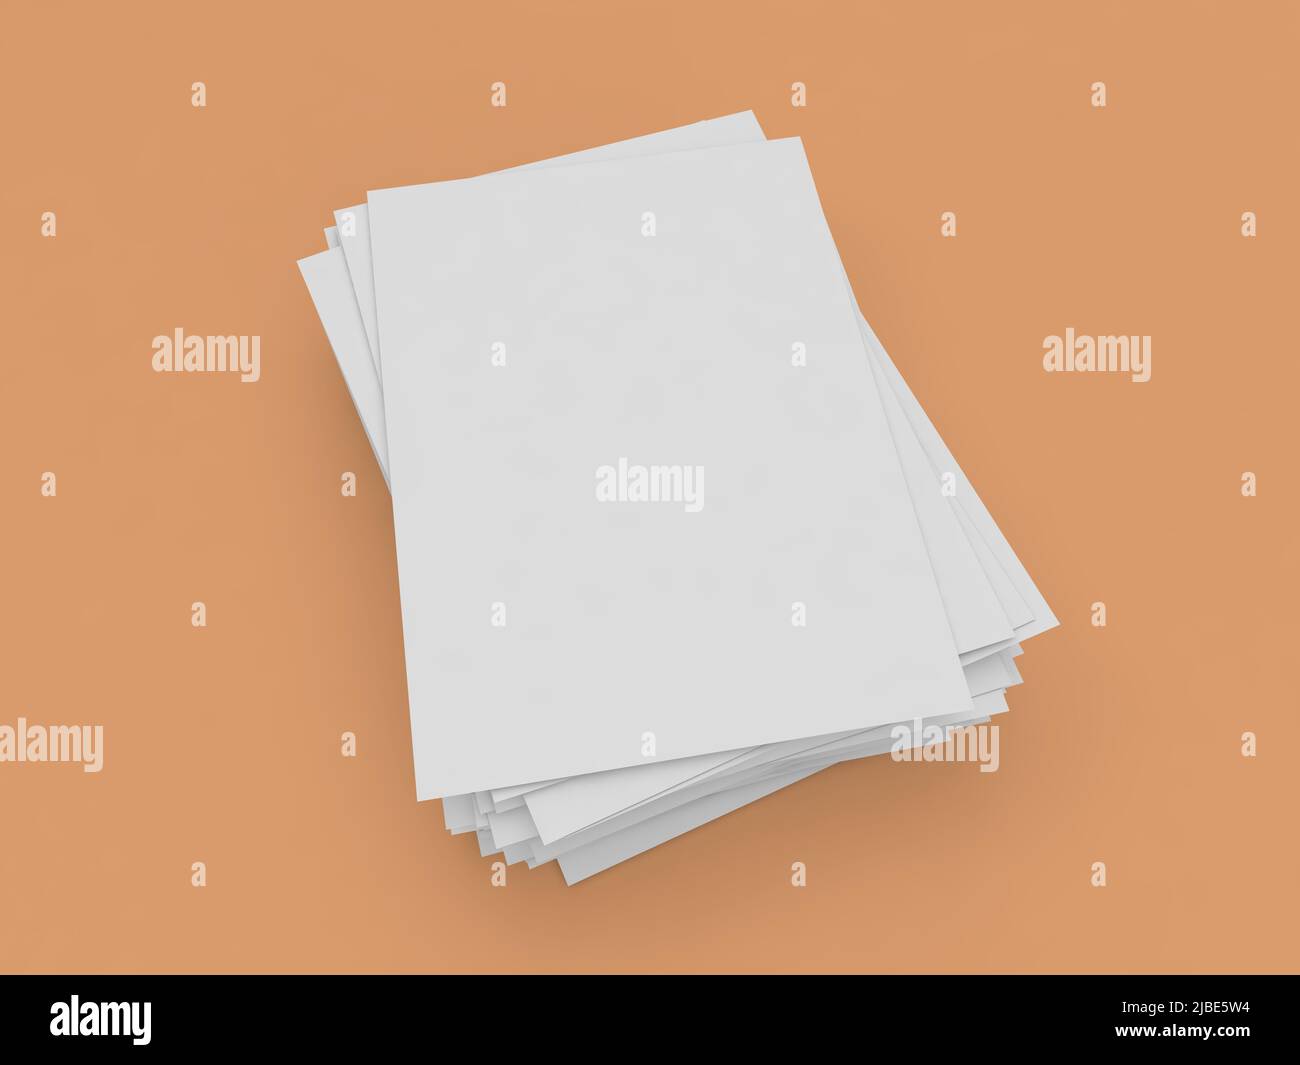 A stack of white A4 paper on a brown background. 3d render illustration. Stock Photo